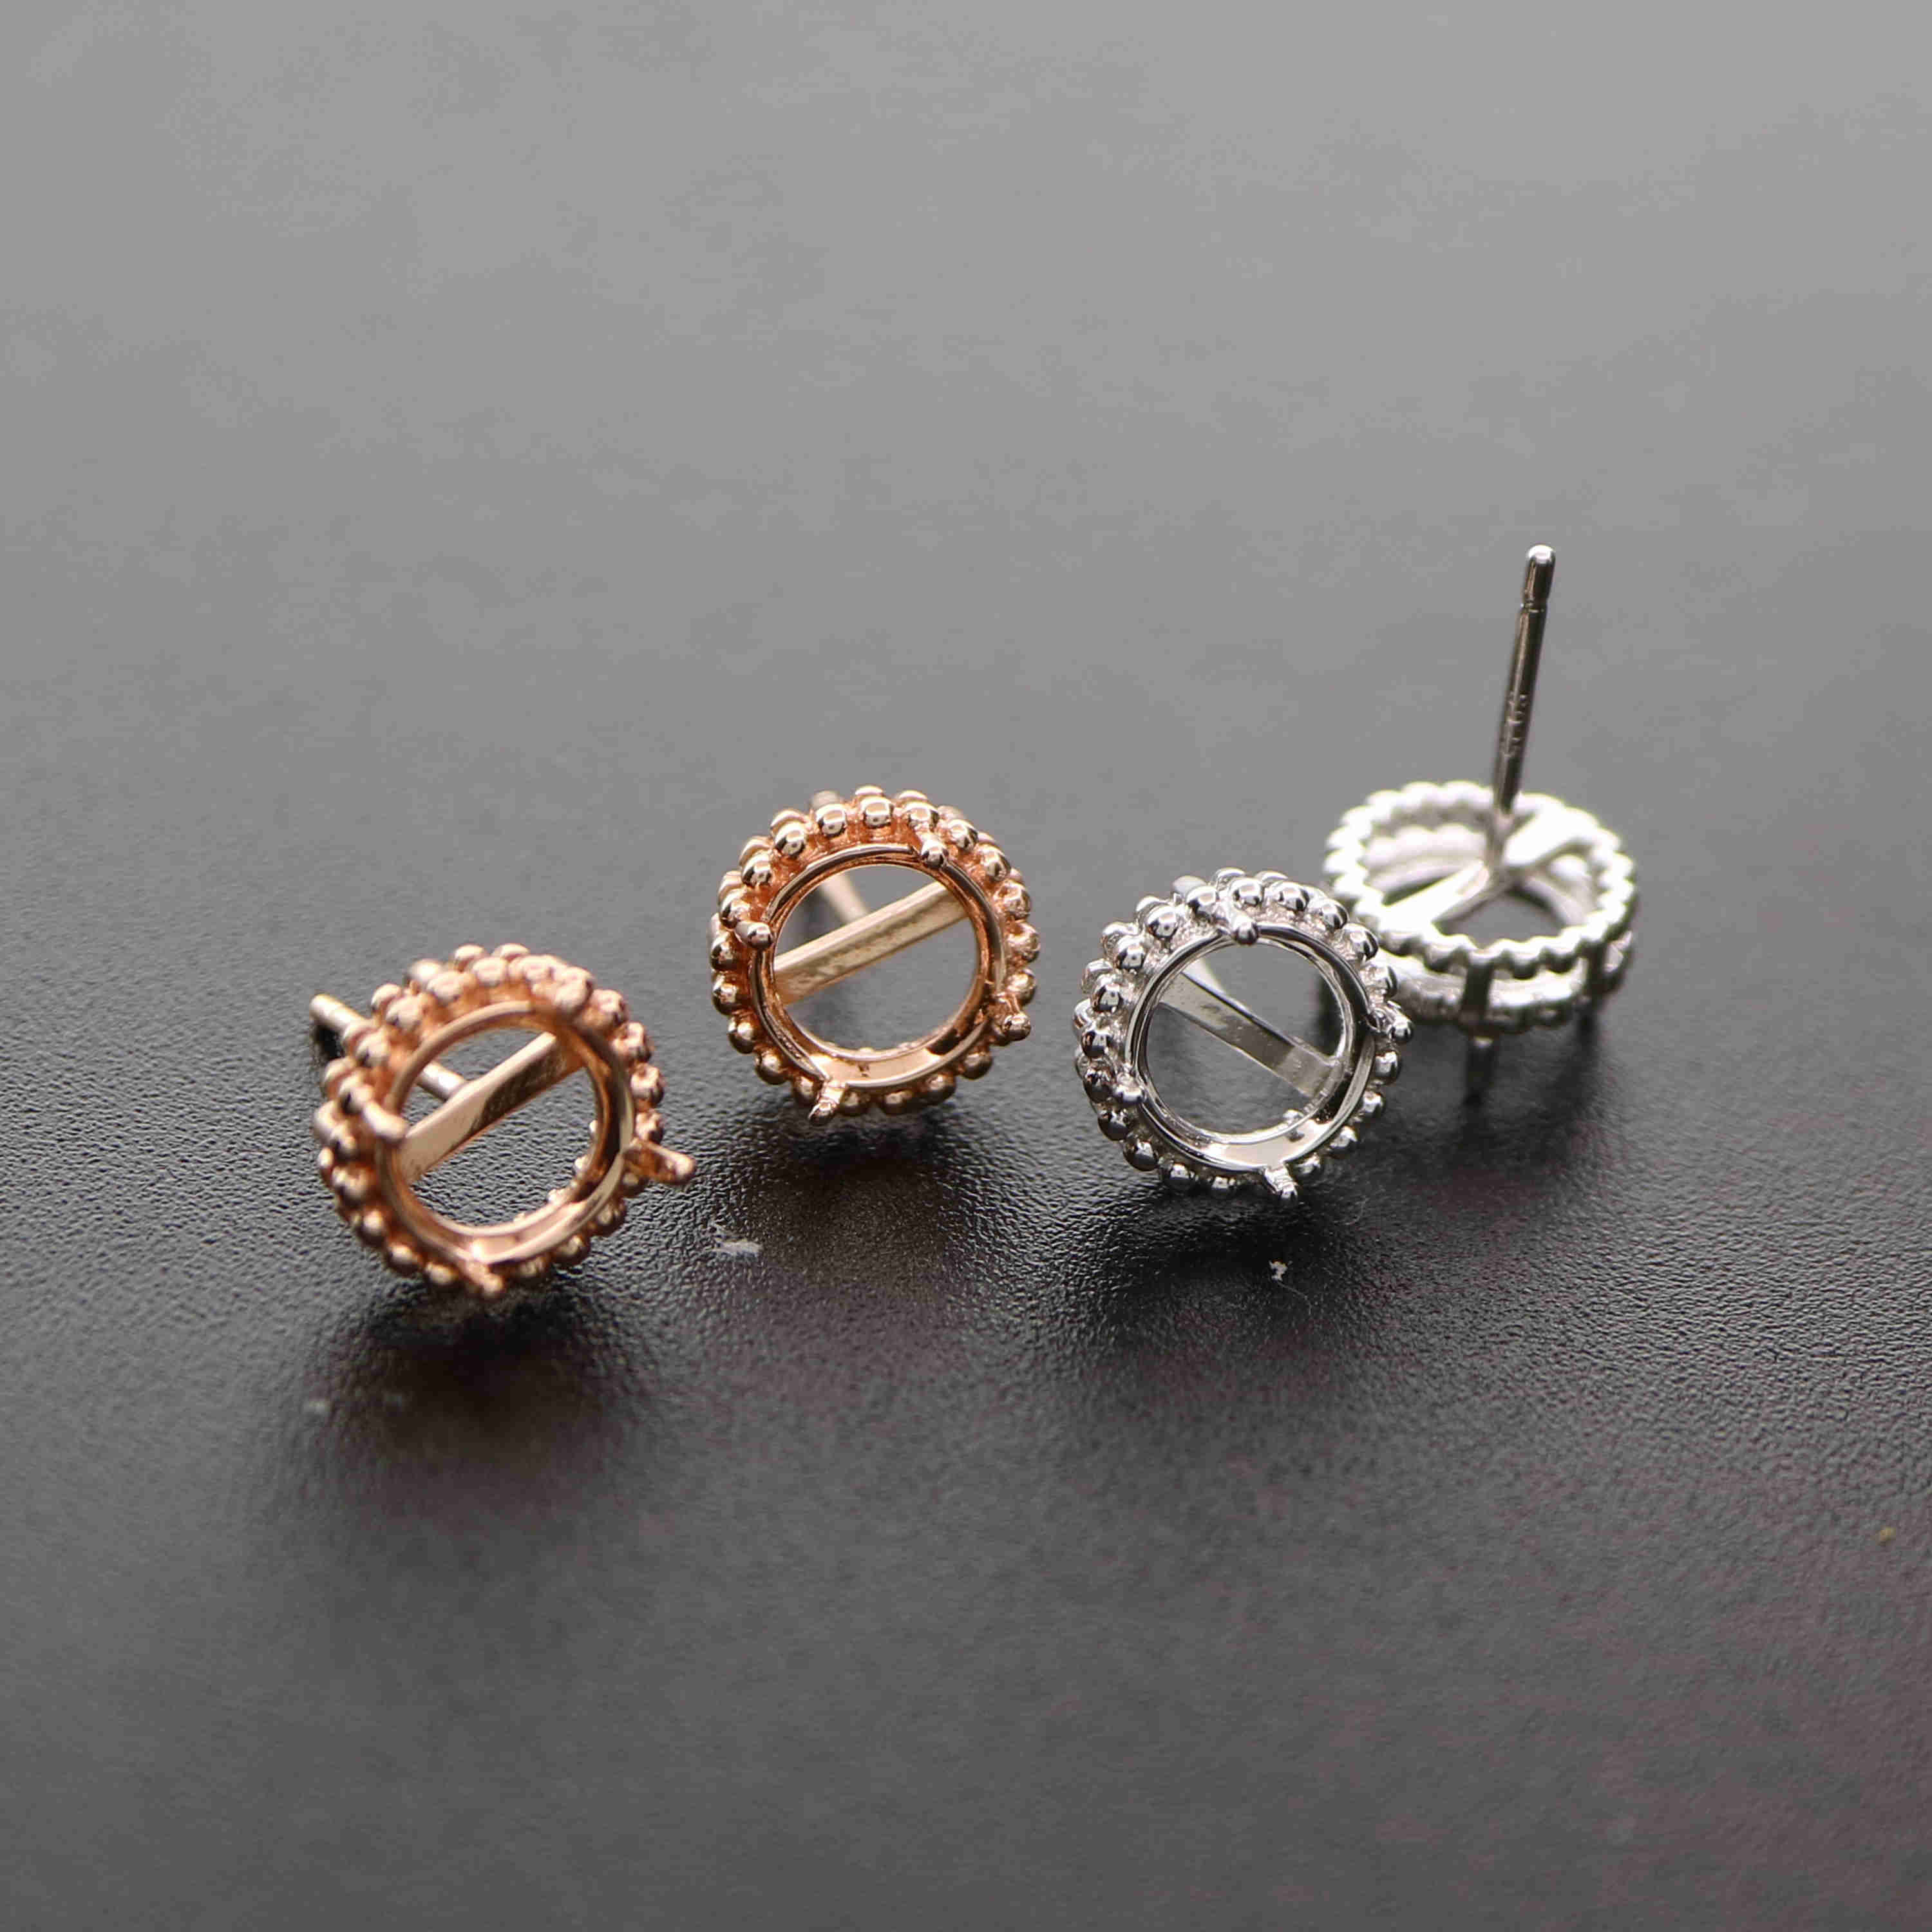 1Pair 5-8MM Round Solid 925 Sterling Silver Rose Gold Tone DIY Prong Studs Earrings Settings Bezel 1706021 - Click Image to Close